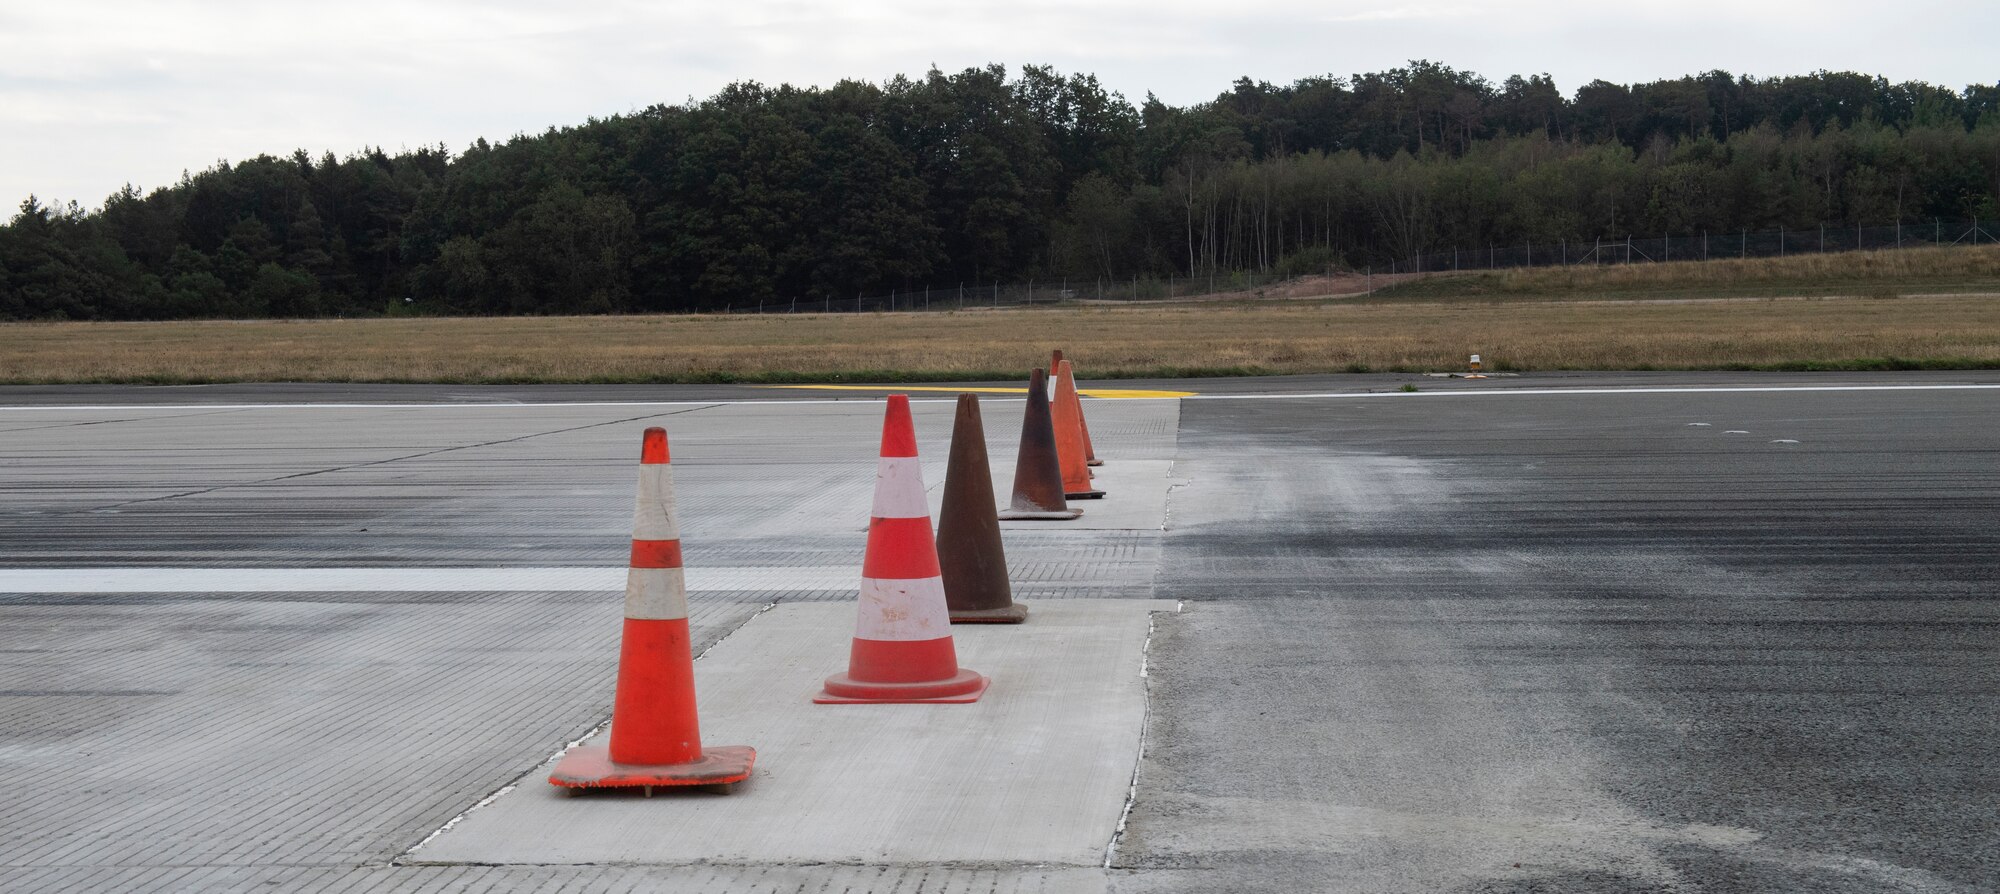 Traffic cones sit on the site where pavement was replaced on the flightline at Spangdahlem Air Base, Germany, Sept. 10, 2020. The Dirt Boyz completed this repair over the long holiday weekend and allowed this section of the runway to be operational by the intended date. (U.S. Air Force photo by Airman 1st Class Alison Stewart)